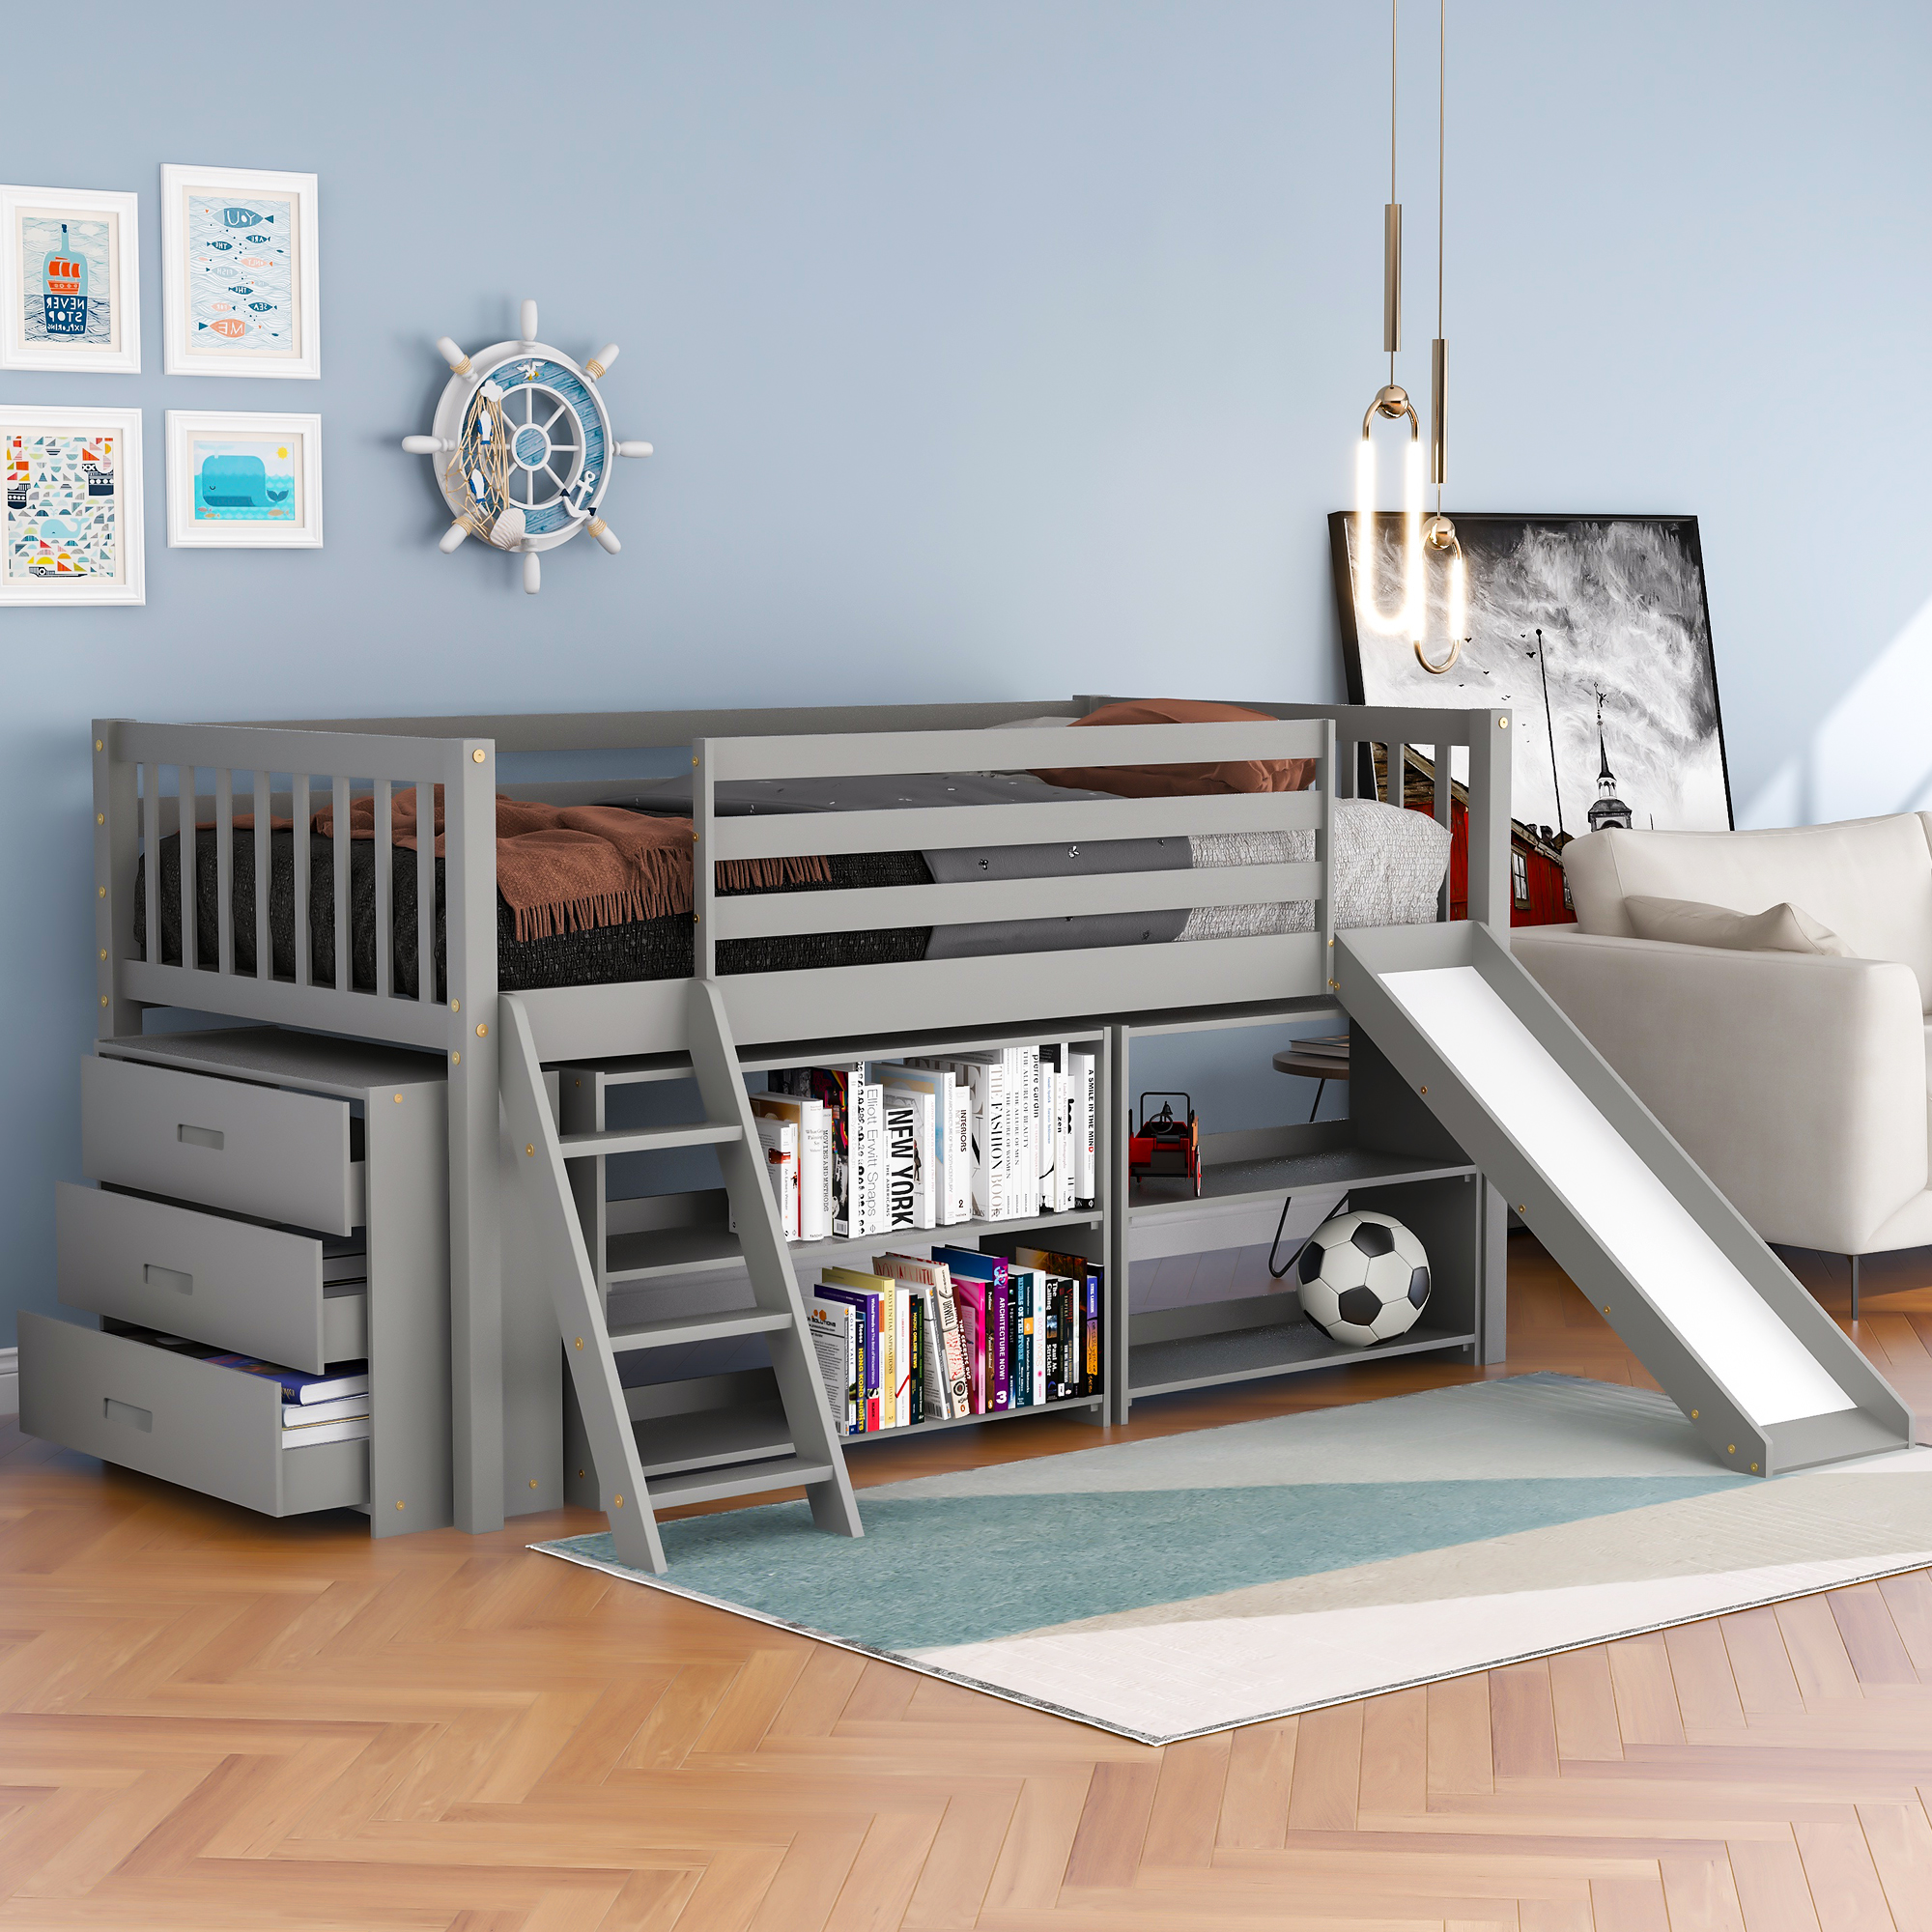 Euroco Wood Twin Size Low Loft Bed with Bookcase, Drawers, Ladder and Slide, Gray - image 1 of 12